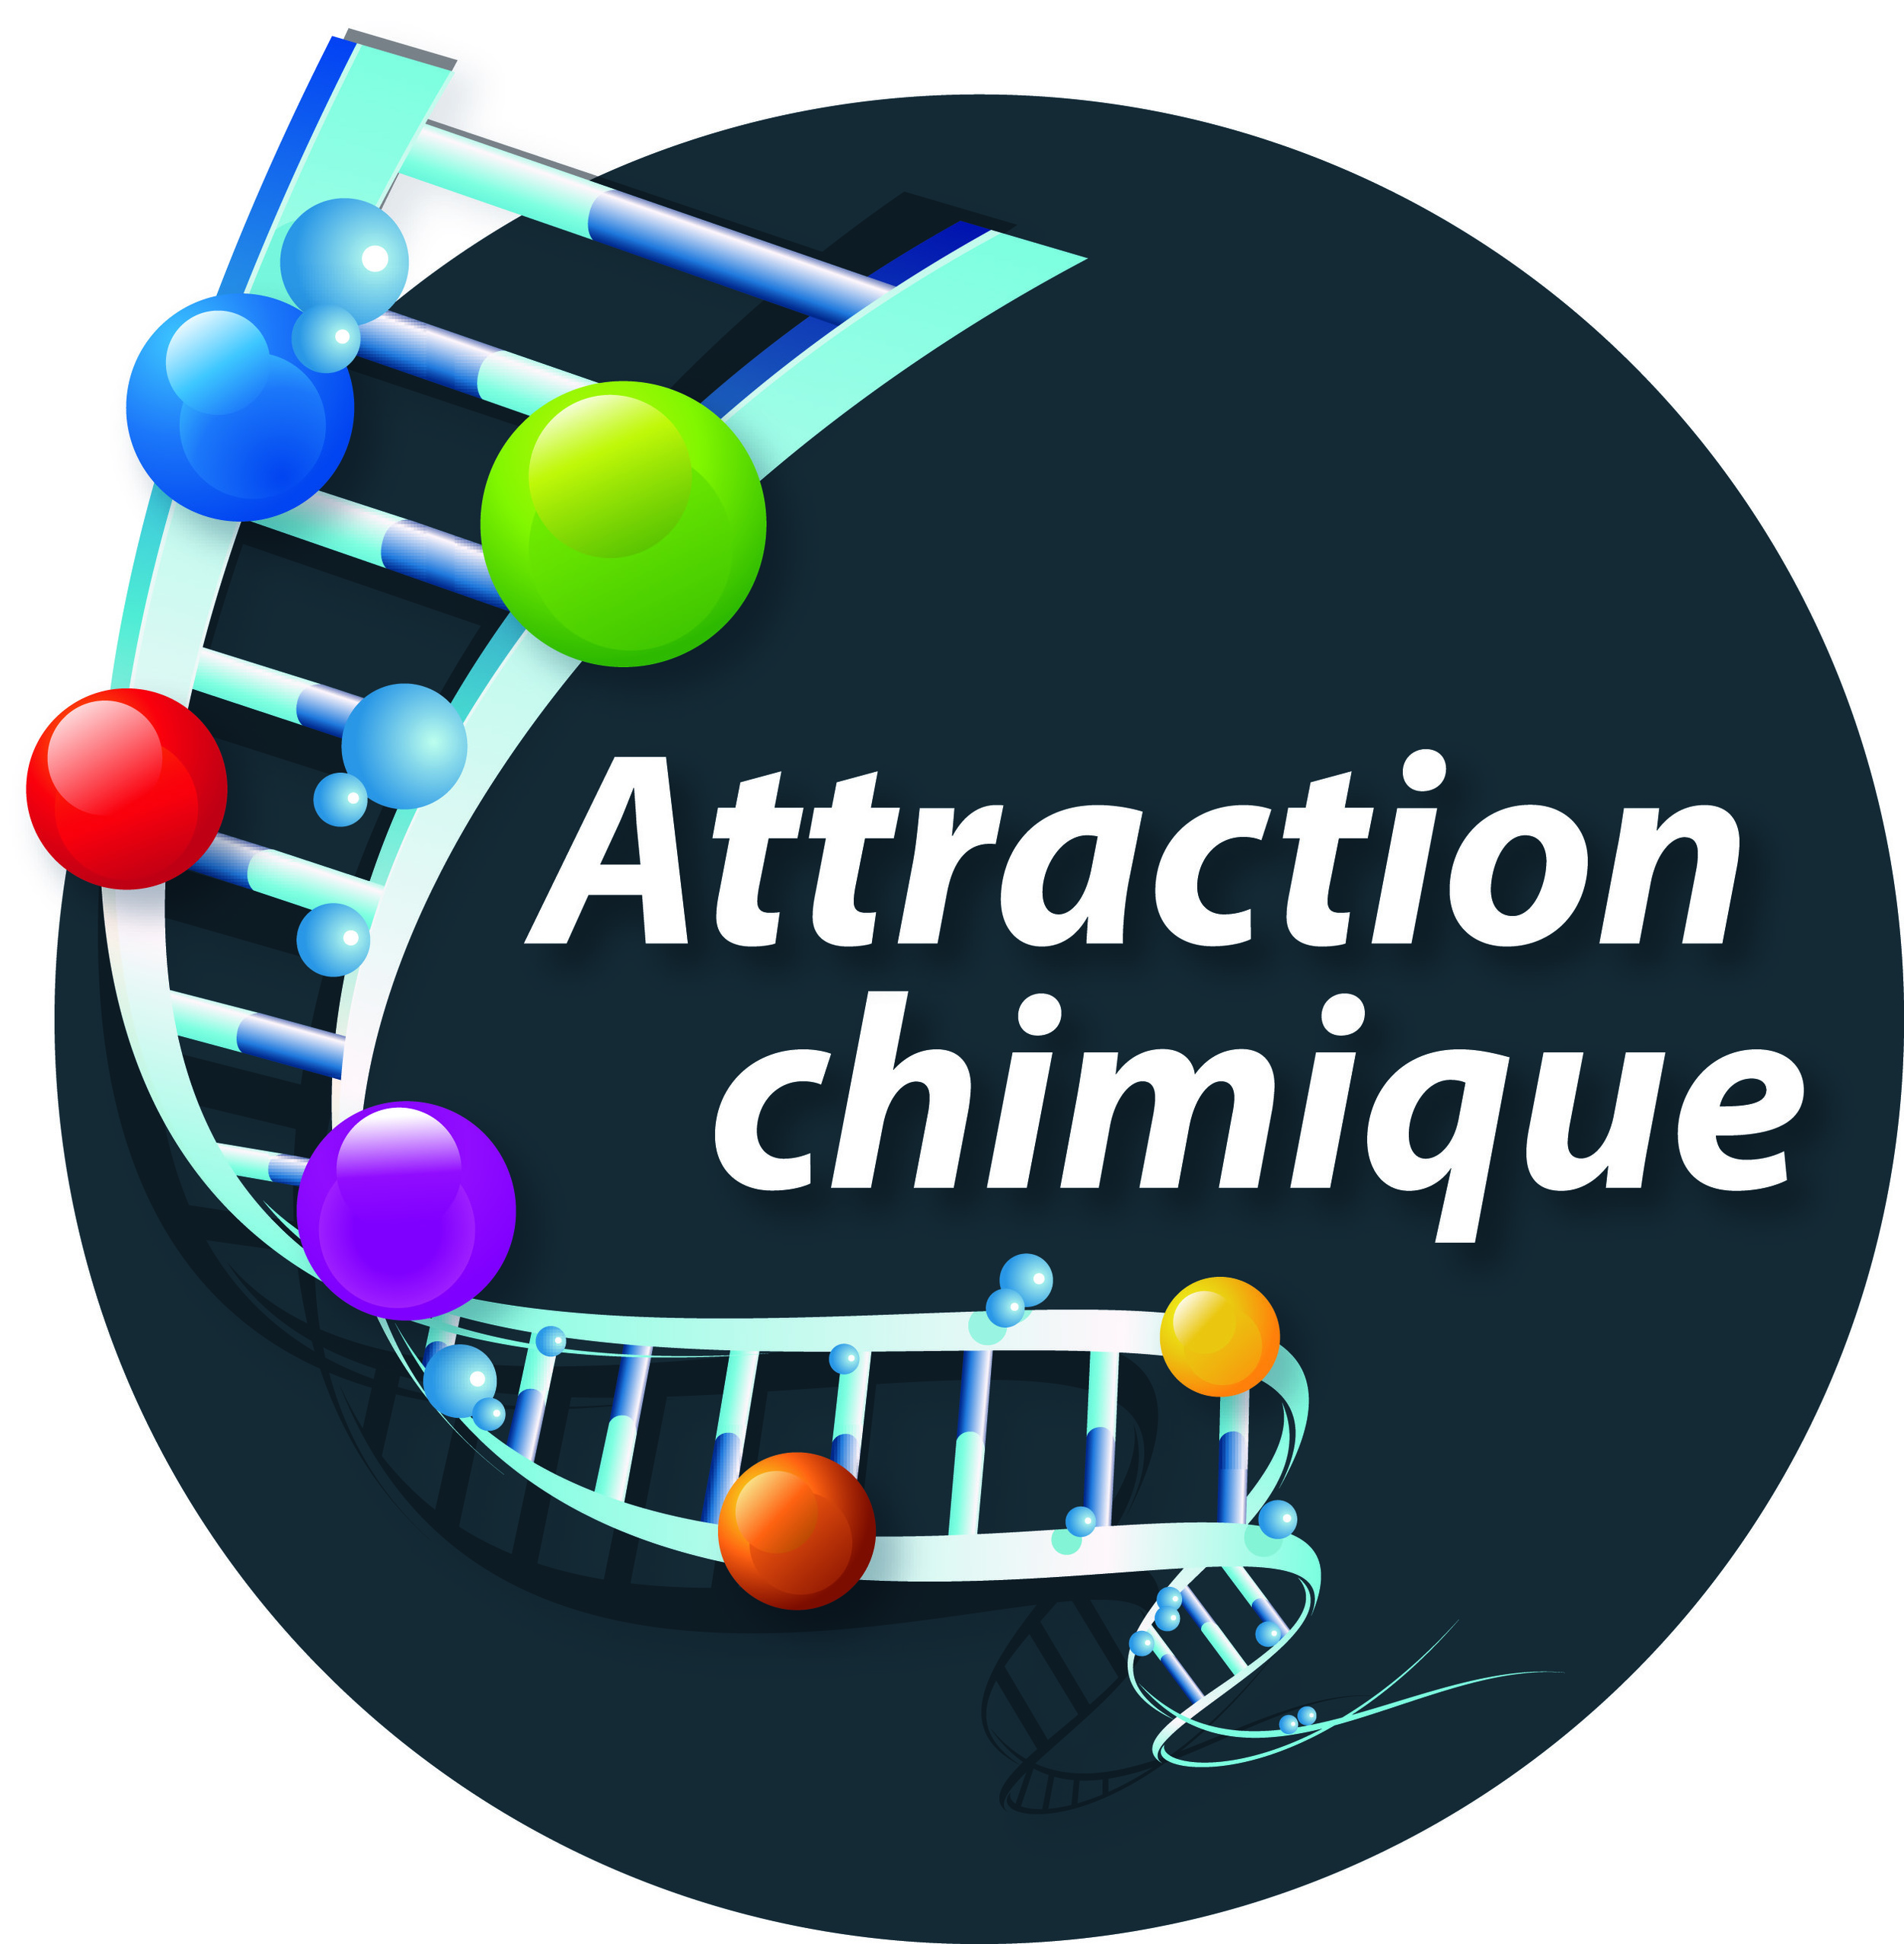 Attraction chimique.jpg